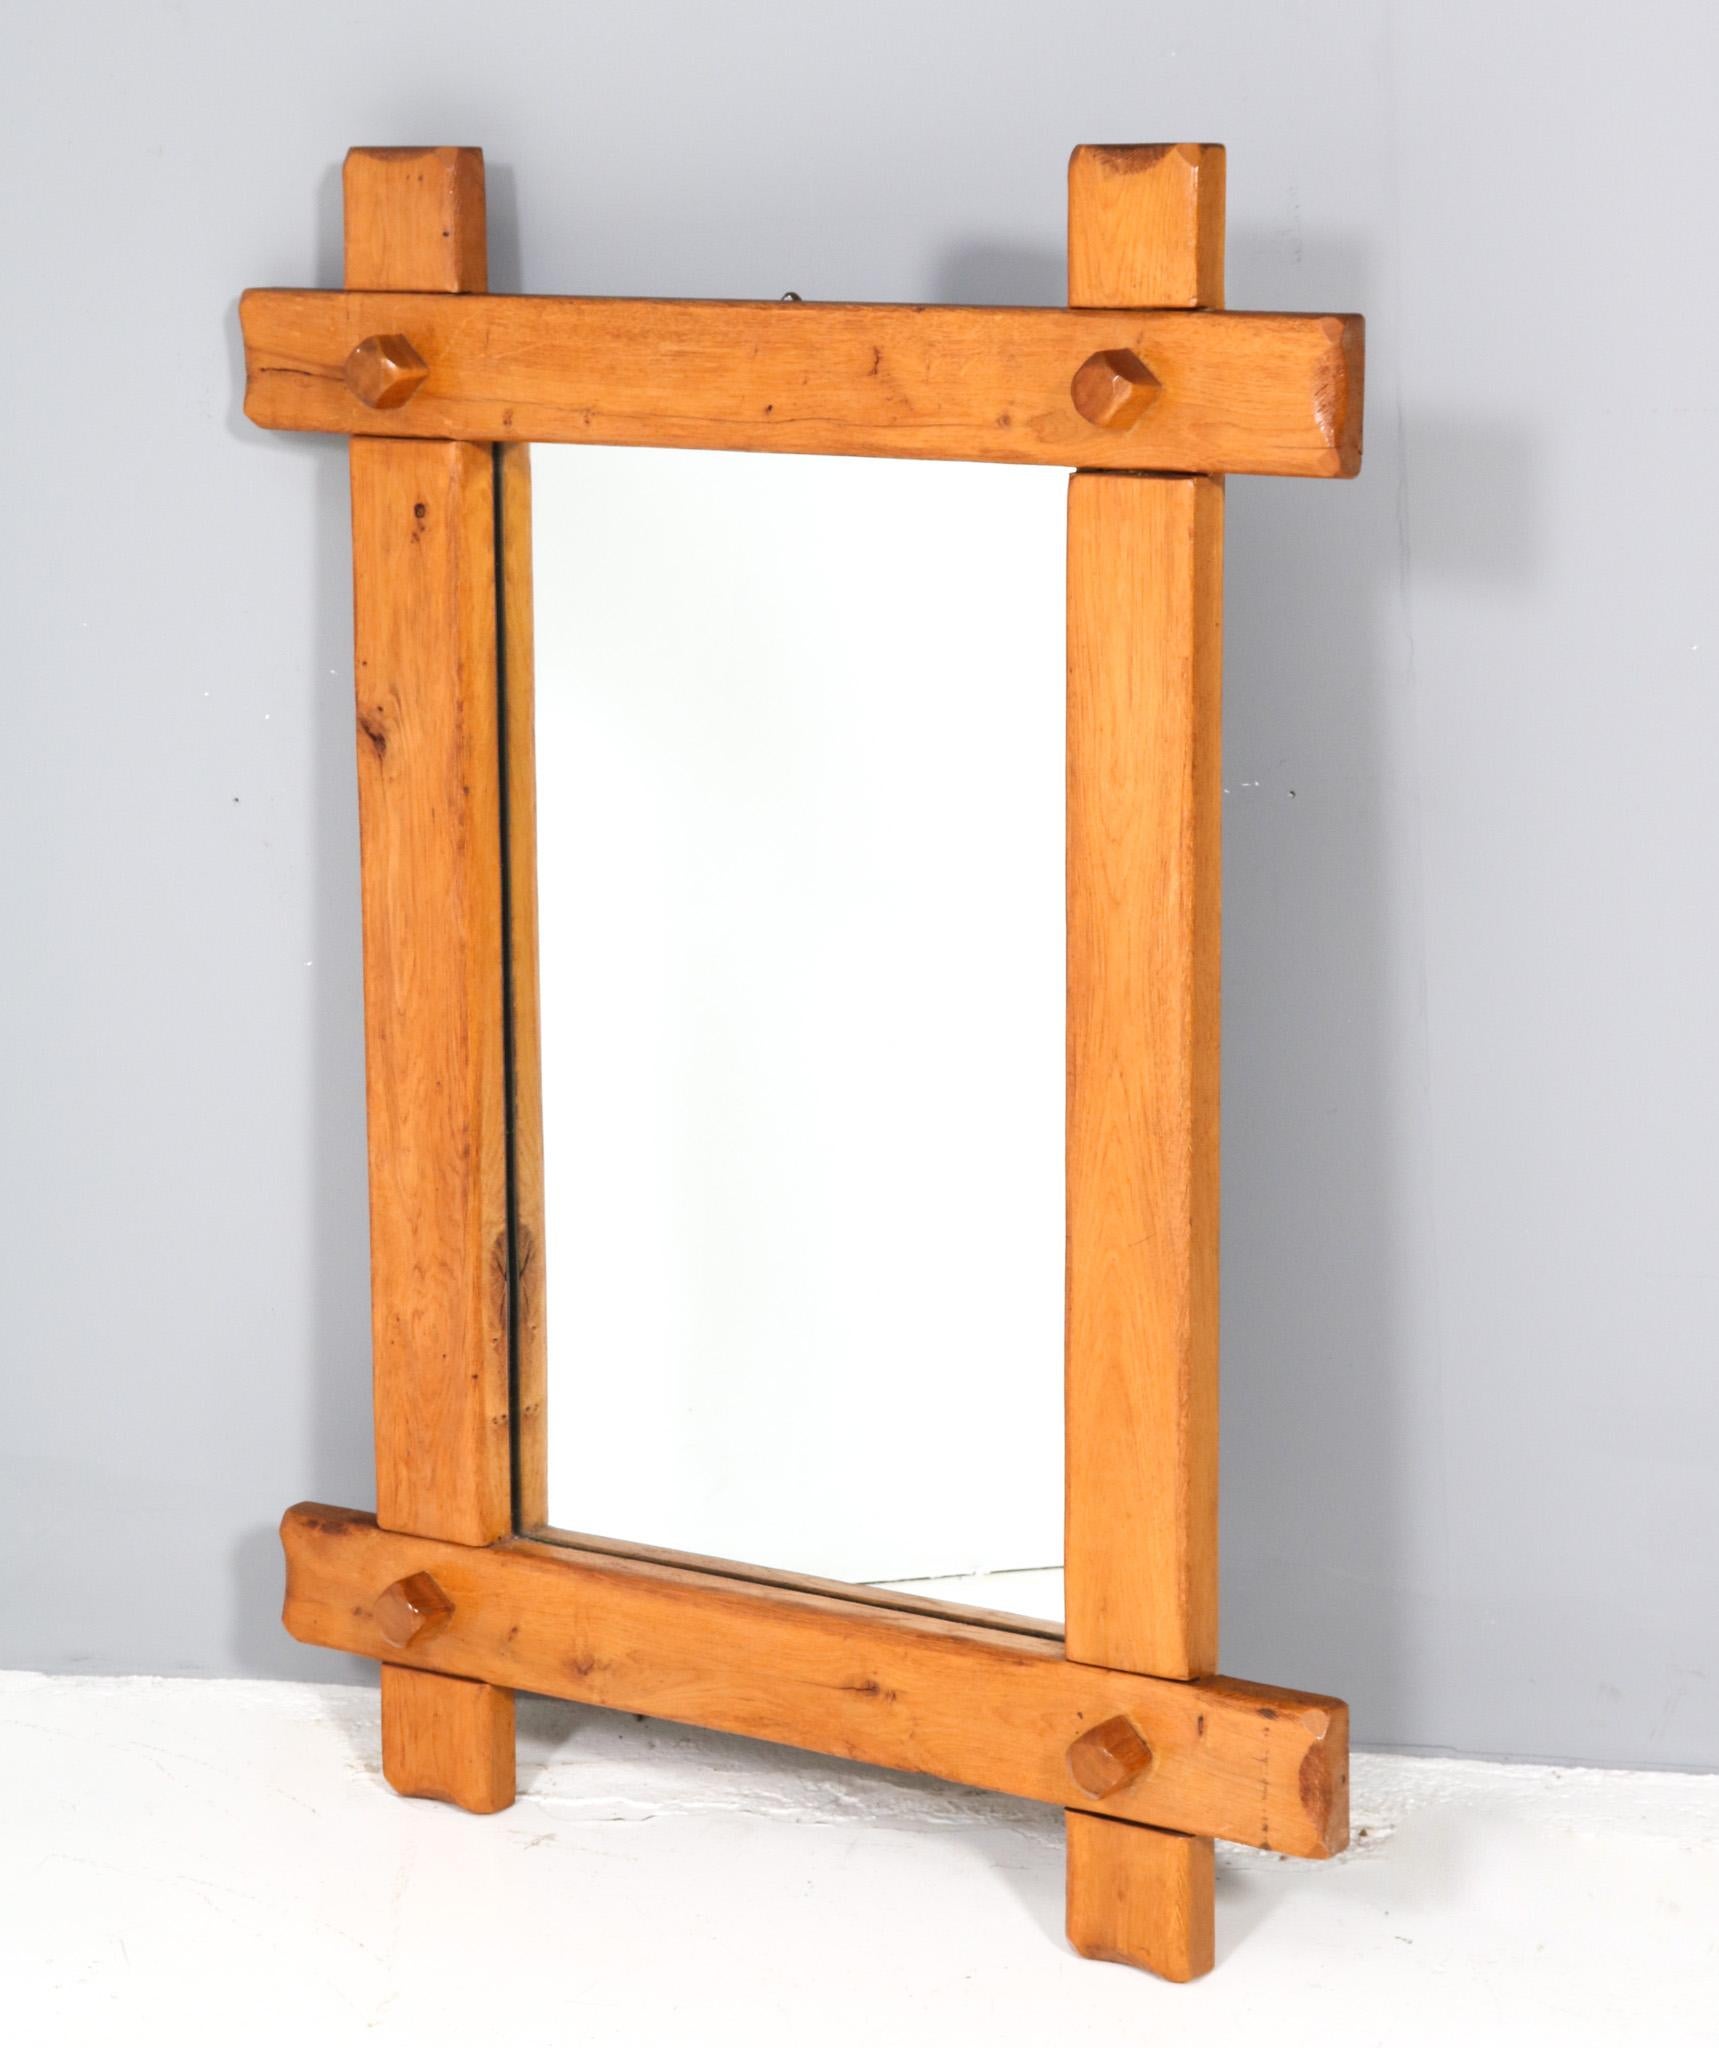 Stunning and rare  large Rustic Brutalist wall mirror.
Striking Dutch design from the 1970s.
Solid oak frame with original mirrored glass.
A real eye-catcher in your home or office.
This wonderful Rustic Brutalist wall mirror is in very good